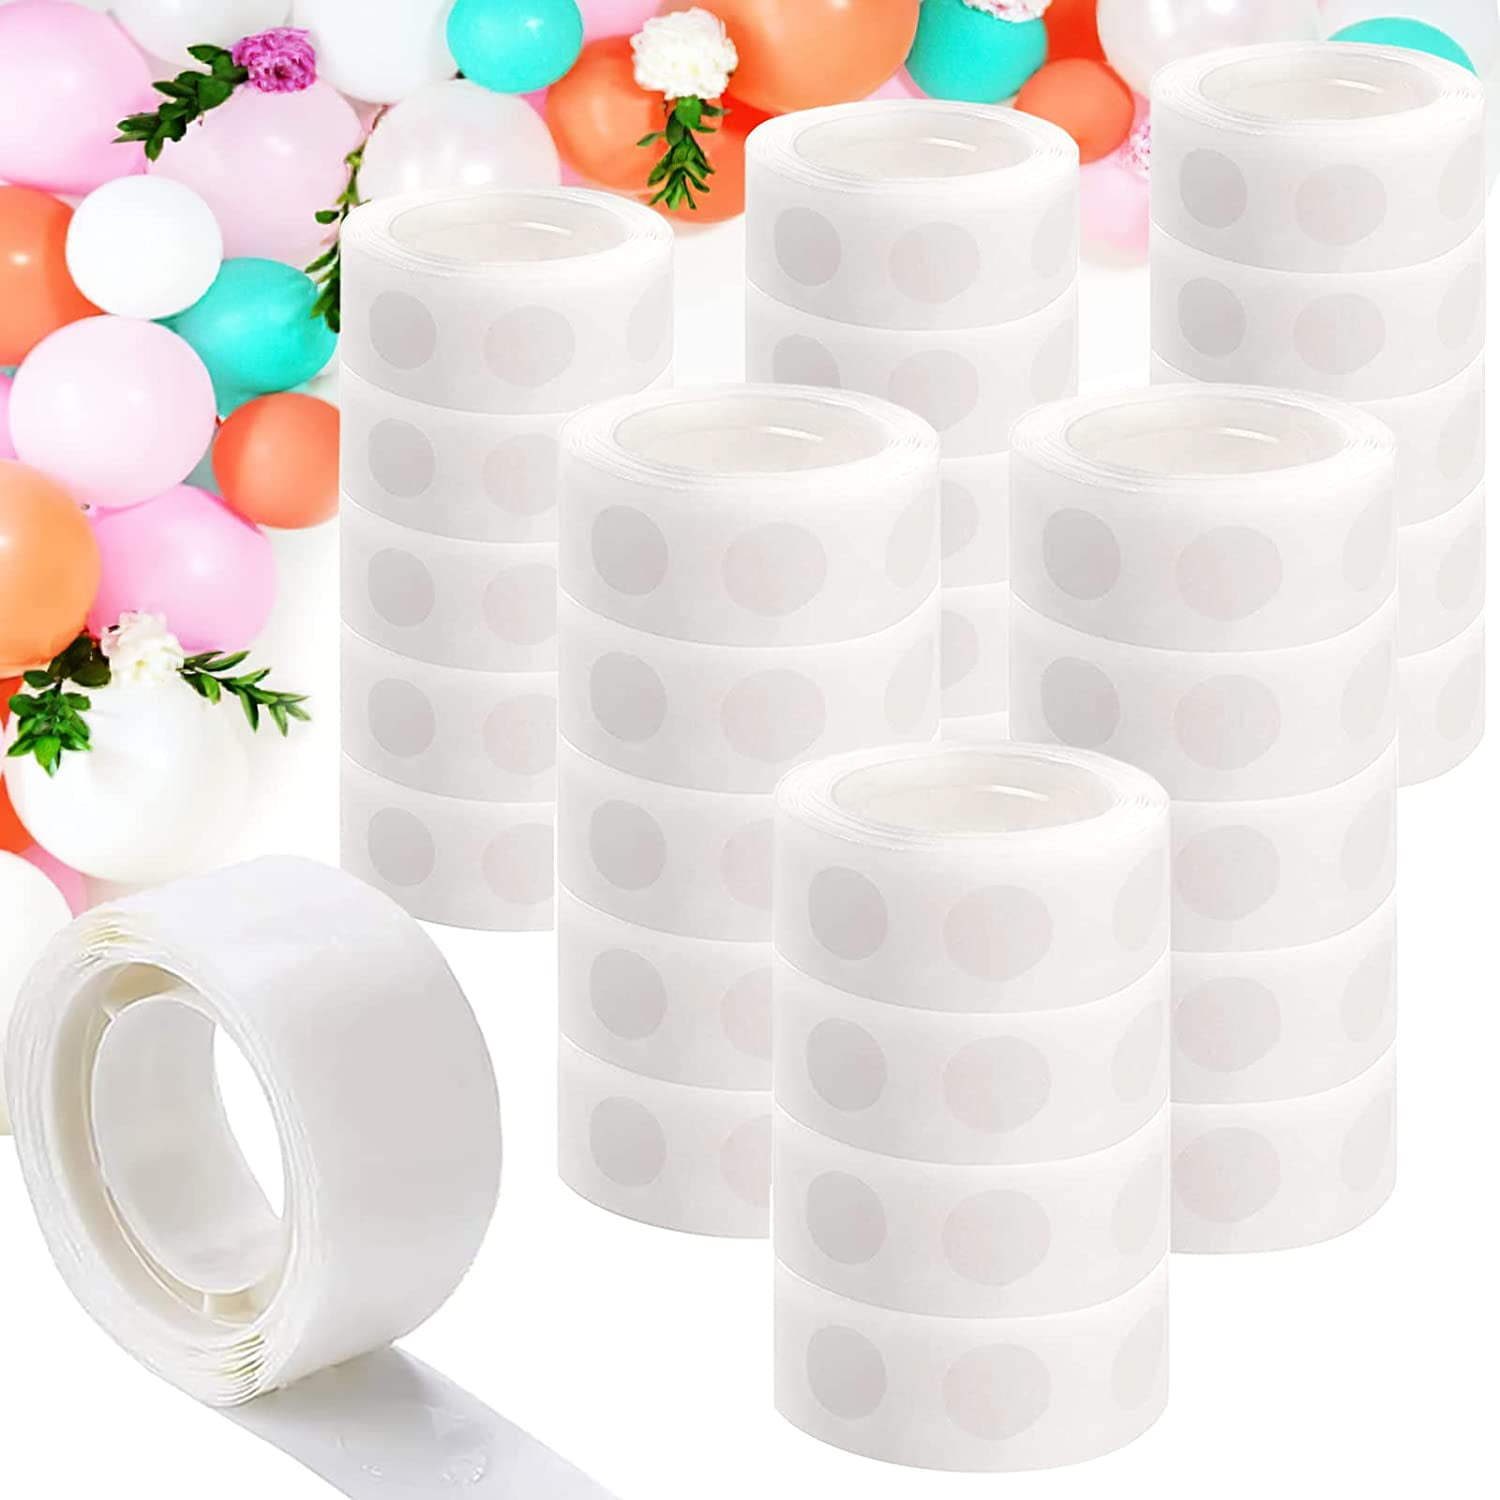 GCOA Balloon Glue Point 2500 PCS (25 Rolls) Balloon Tape Strip of Glue  Craft Removable Adhesive Dots Double Sided Dots of Glue Tape for